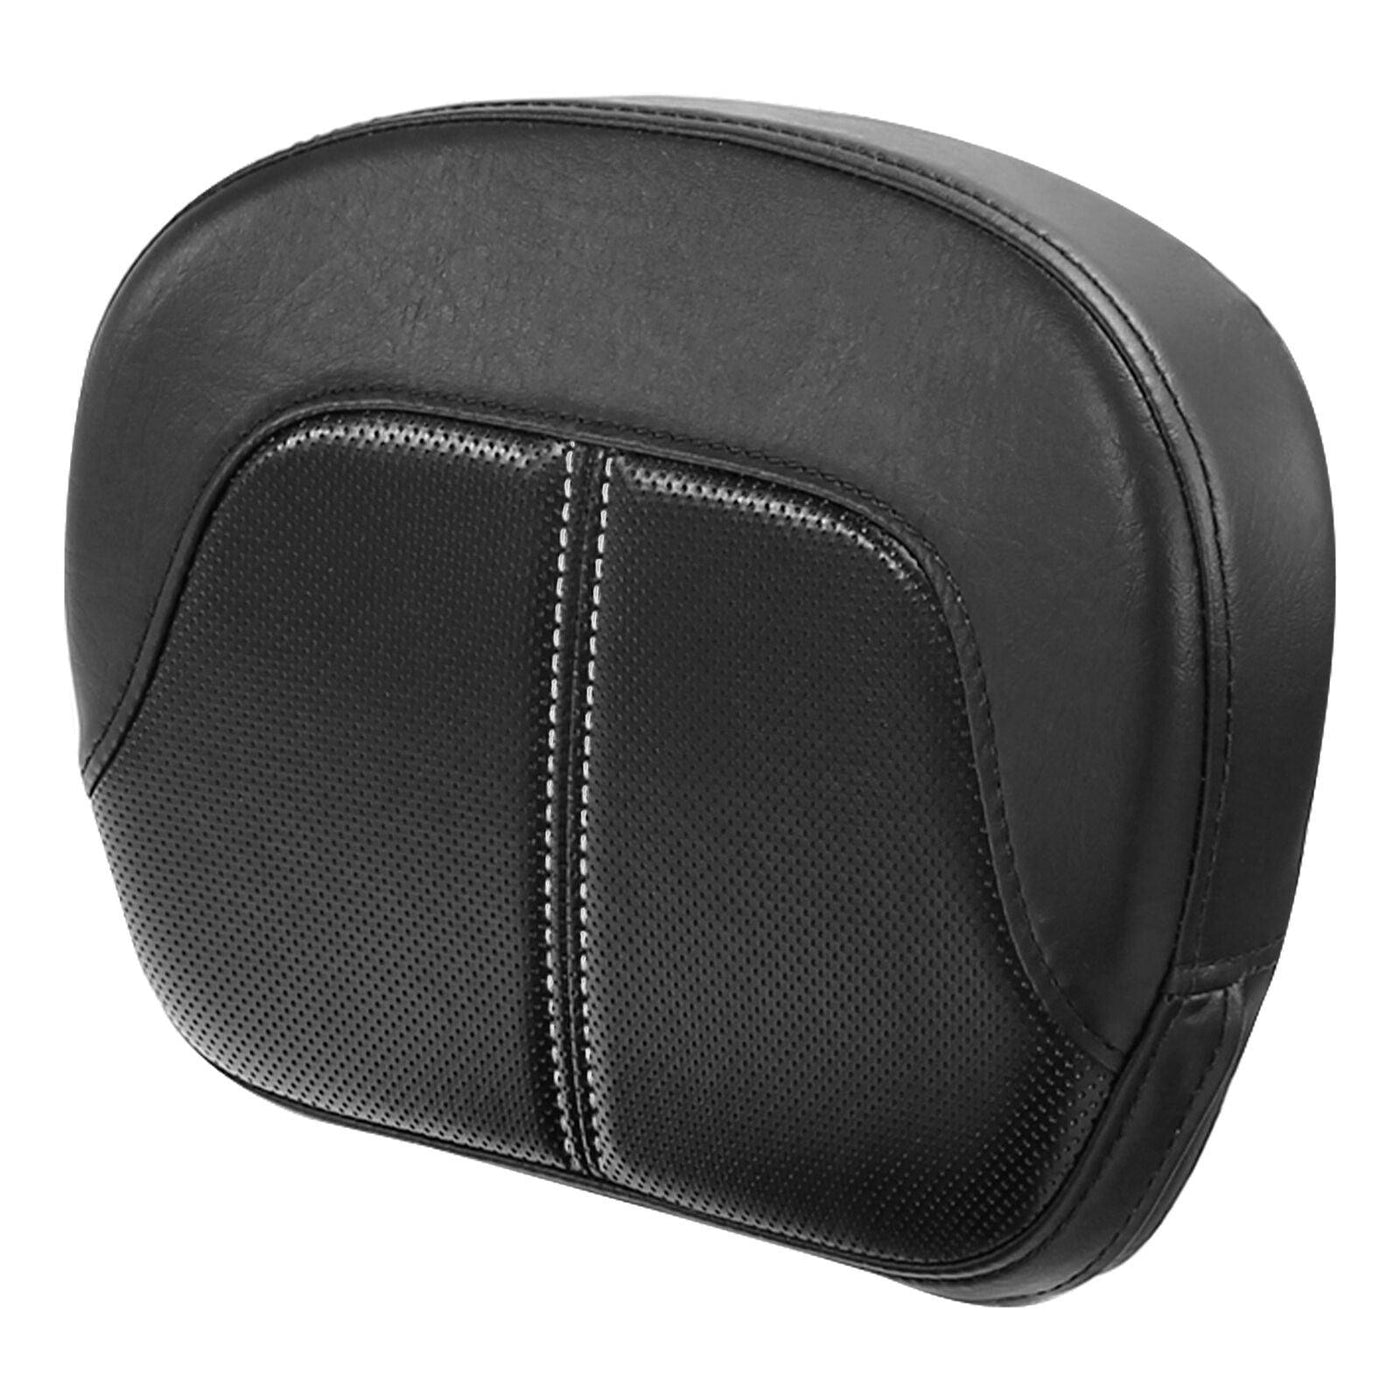 Sissy Bar Passenger Backrest Pad Fit For Harley Electra Street Glide Road King - Moto Life Products